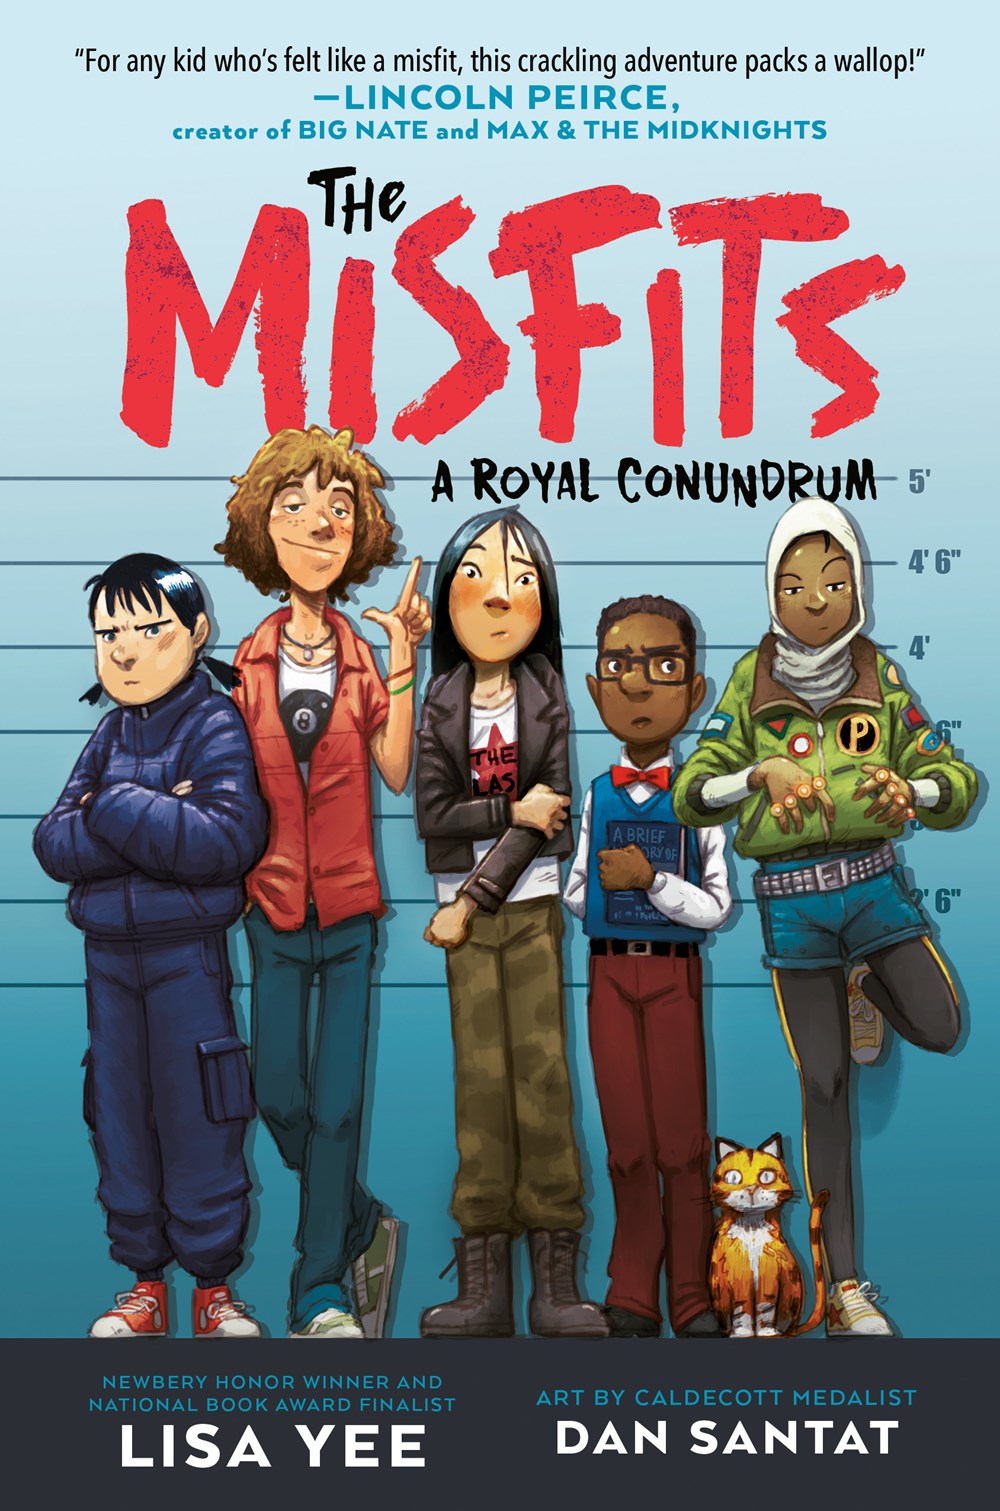 The Misfits #1: A Royal Conundrum by Lisa Yee, illustrated by Dan Santat